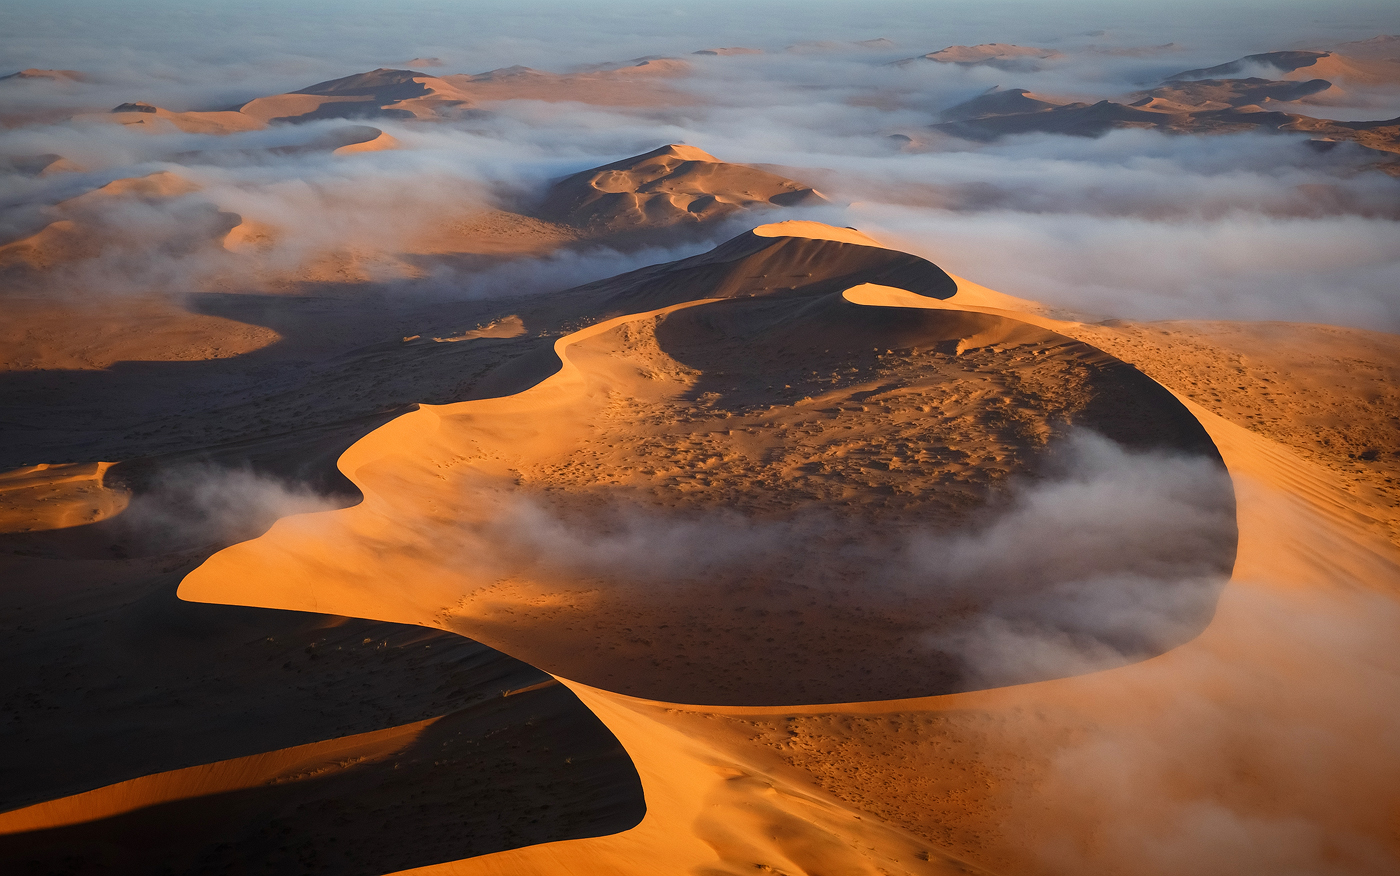 The gigantic dunes of the Namib Desert can rise 300 meters high – no chance of shooting them with a drone, even if droning were allowed in the accessible parts of Sossusvlei, which it isn't. I took this image from a helicopter at a height of more than a kilometer in the air. </br>Canon 5D Mark III, Tamron 24-70 f/2.8 VC, 1/1250 sec, F10, ISO 800. Sossusvlei, Namibia